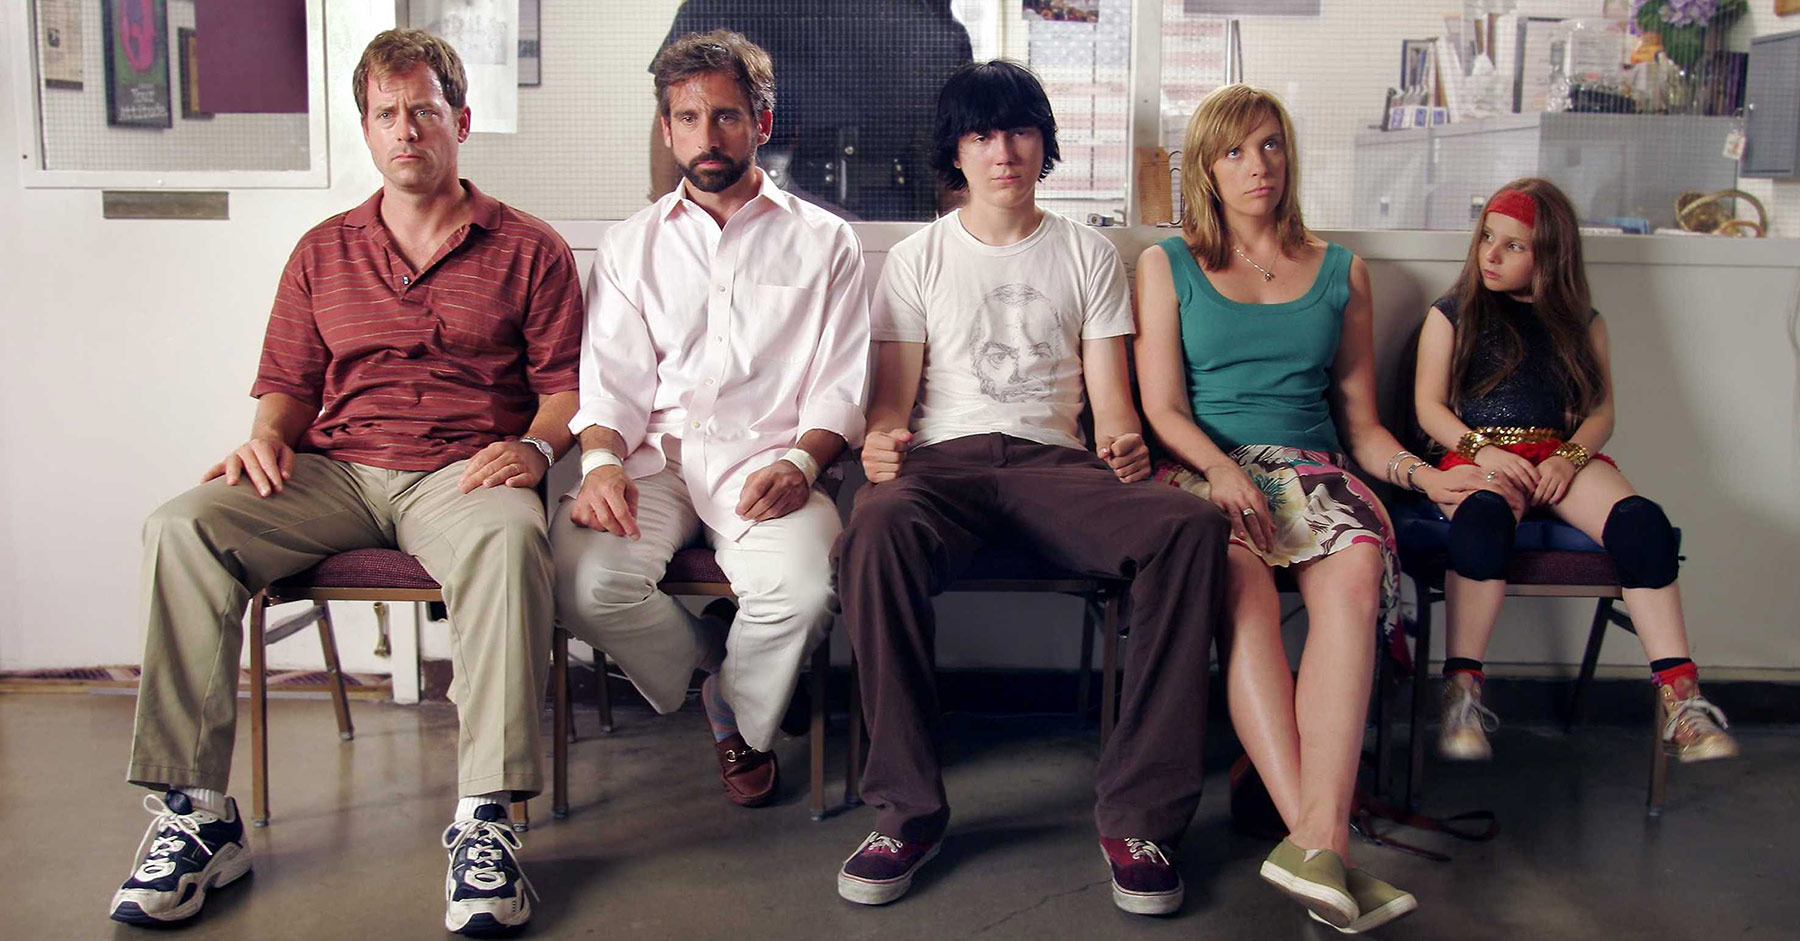 A family of five people sit next to each other in a waiting area